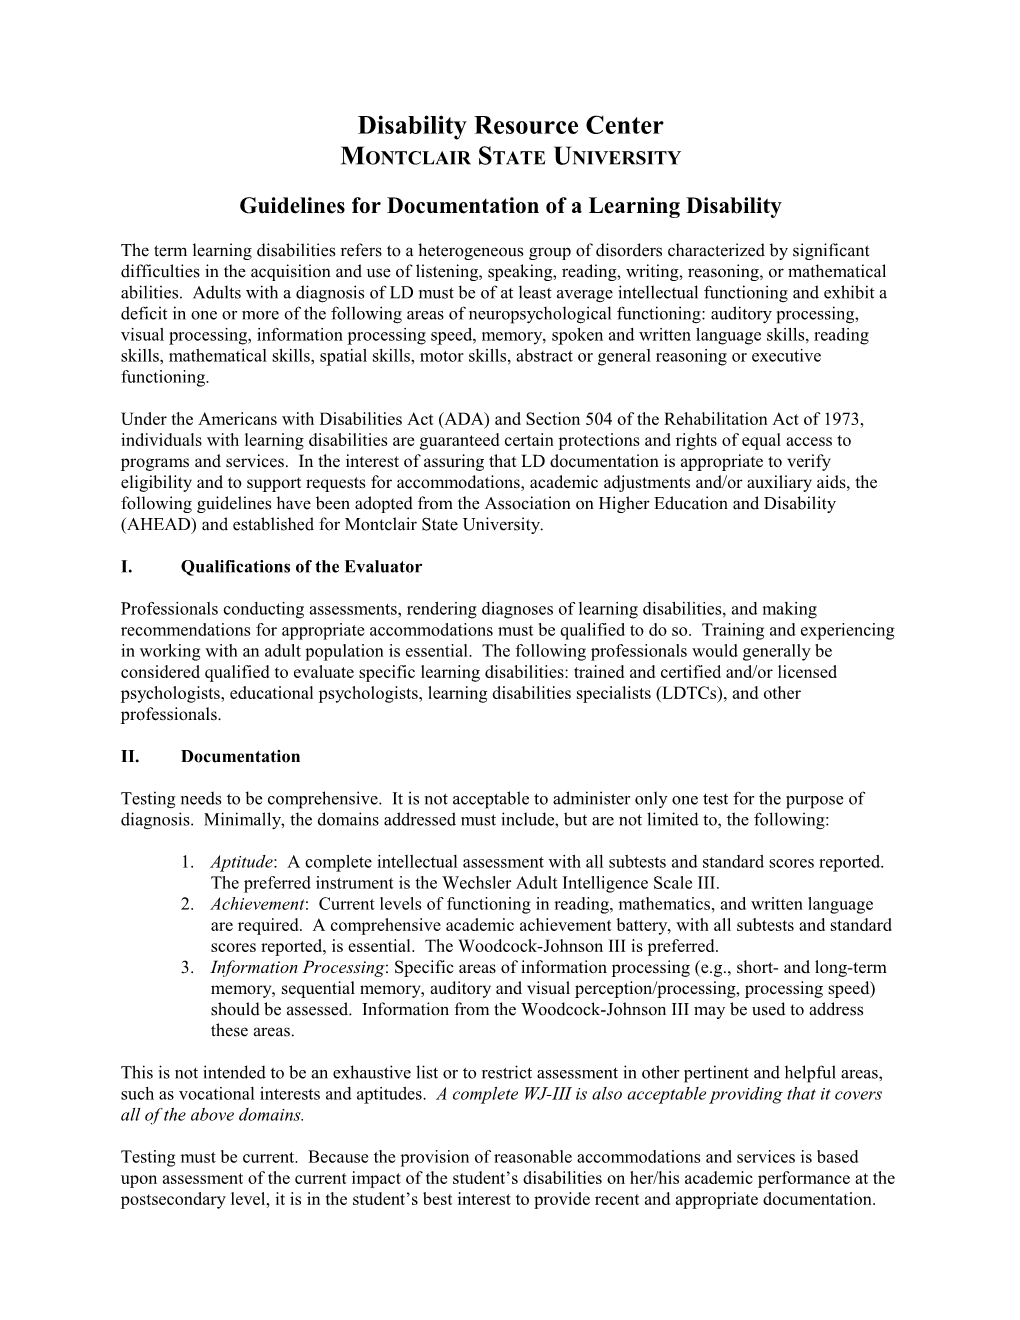 Guidelines for Documentation of a Learning Disability